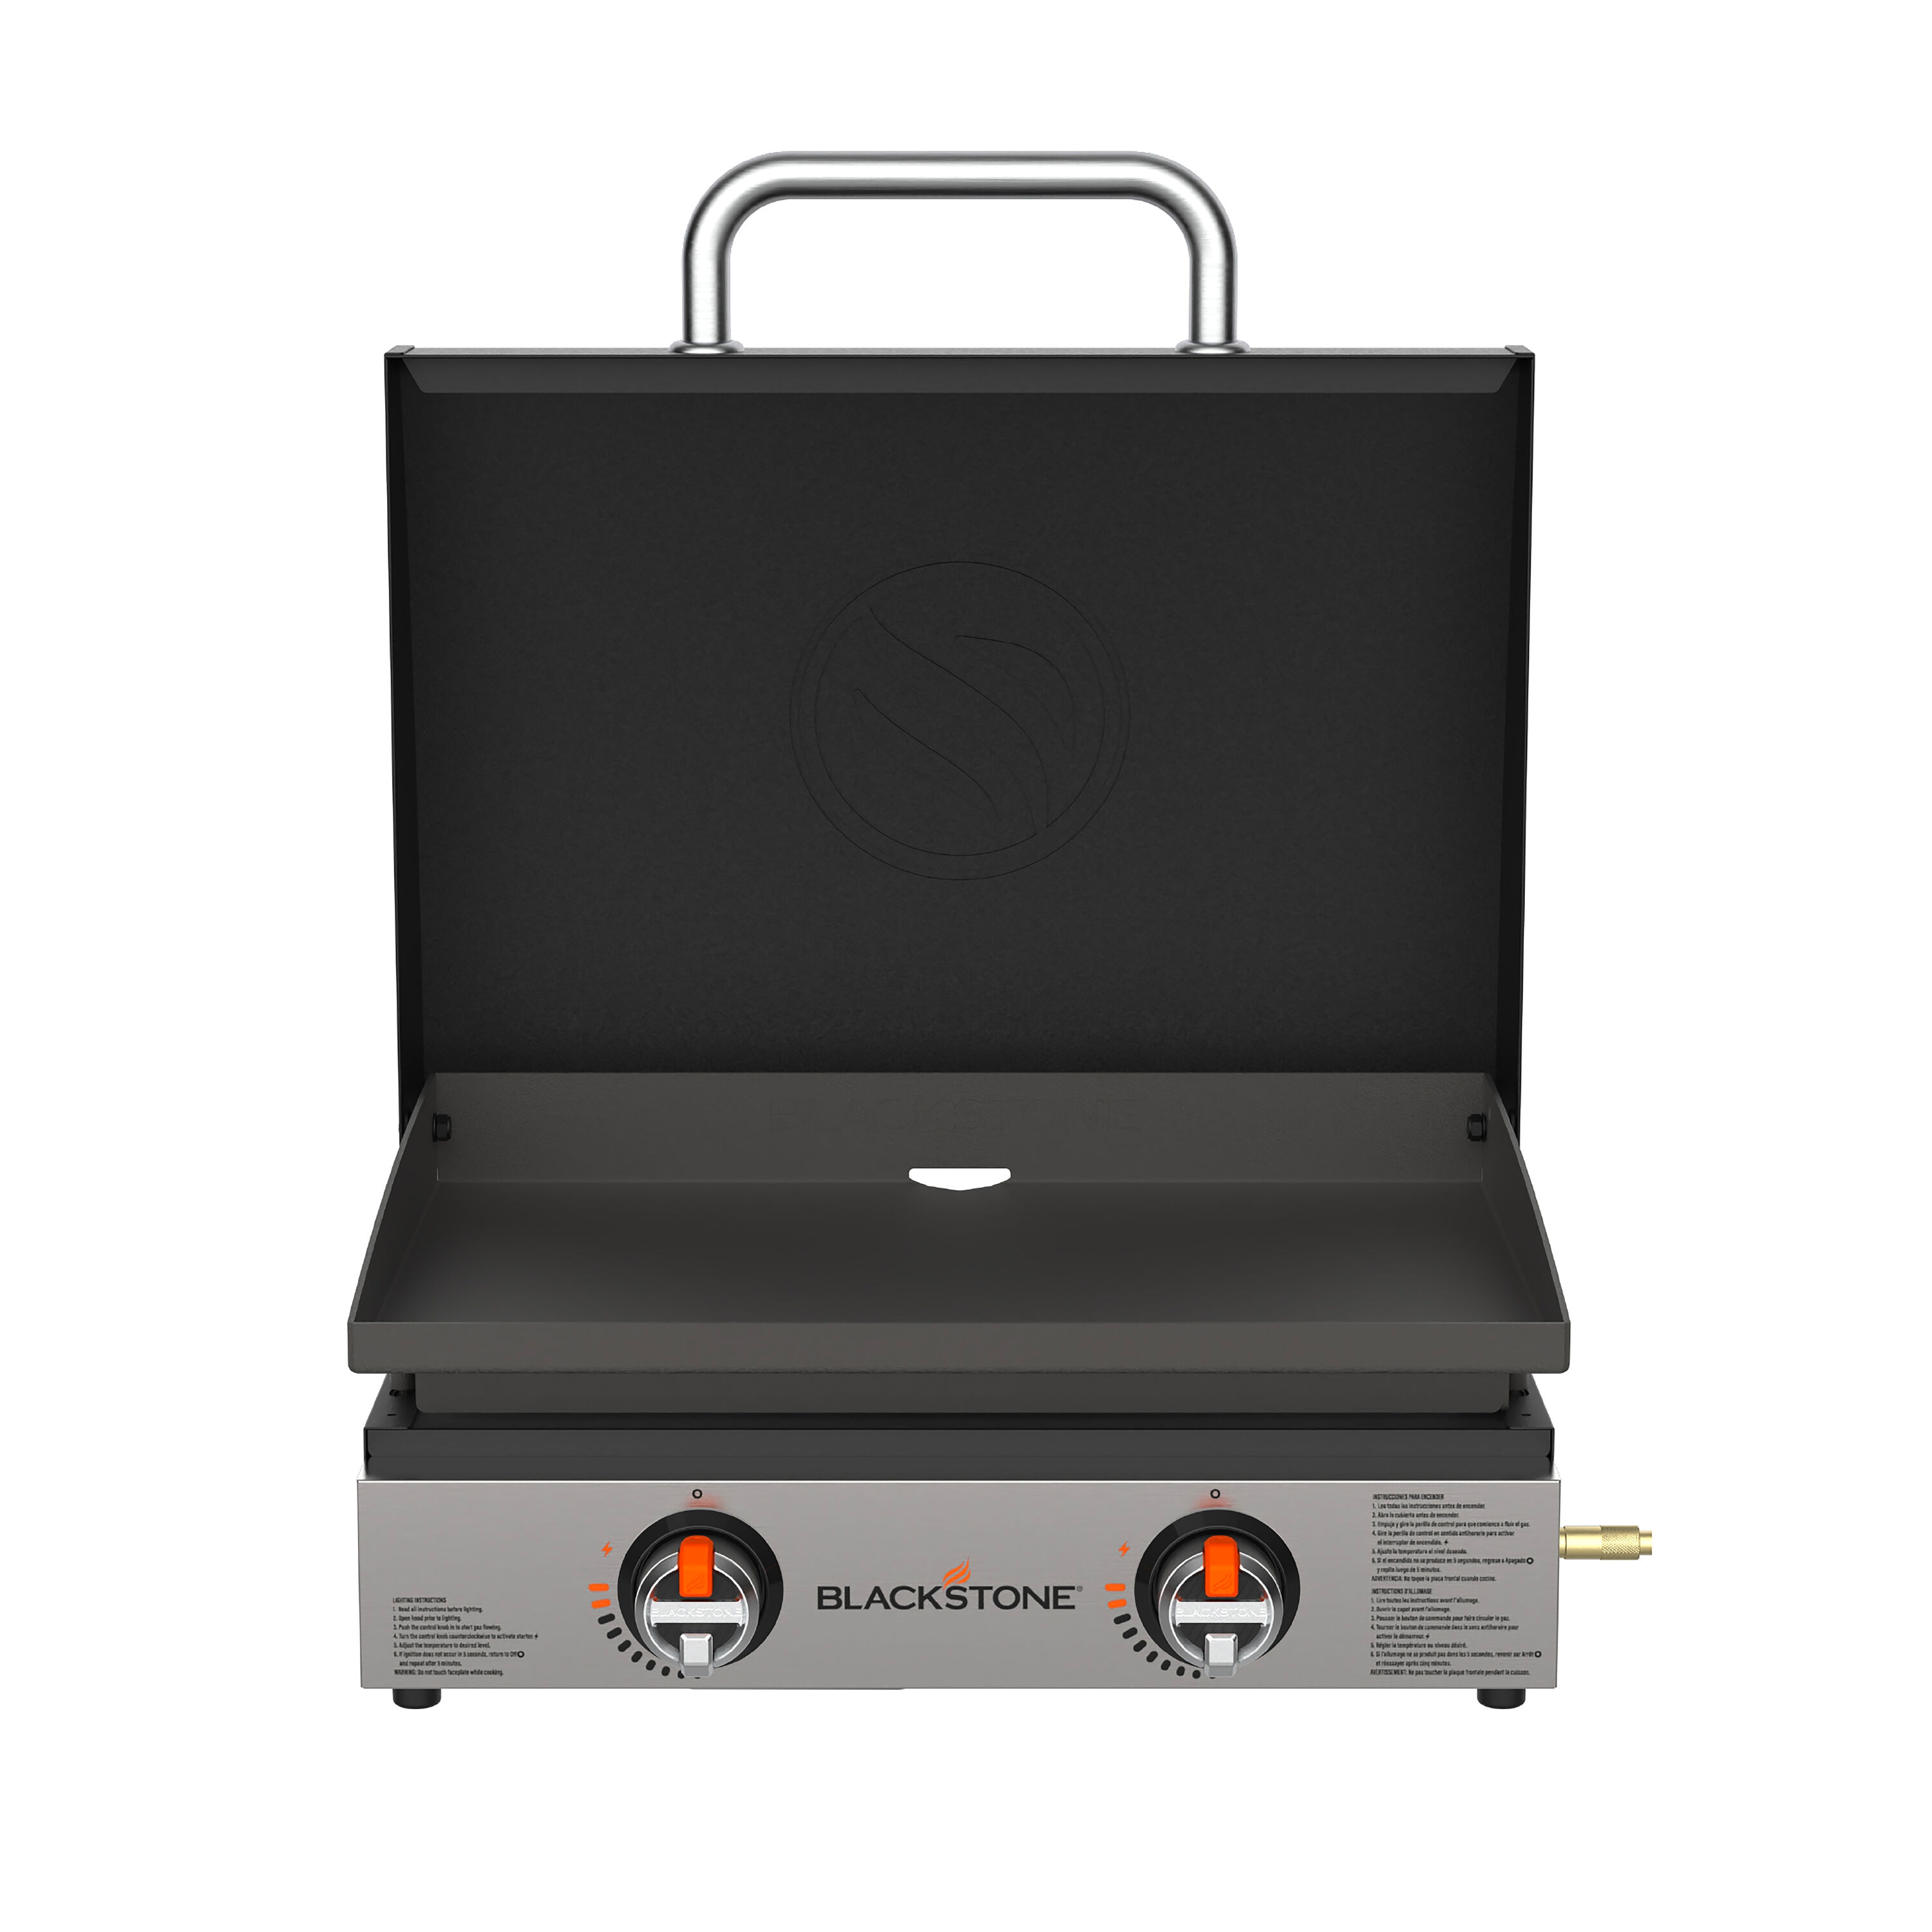 Blackstone 22 Tabletop Griddle with Stainless Front 361-Sq in